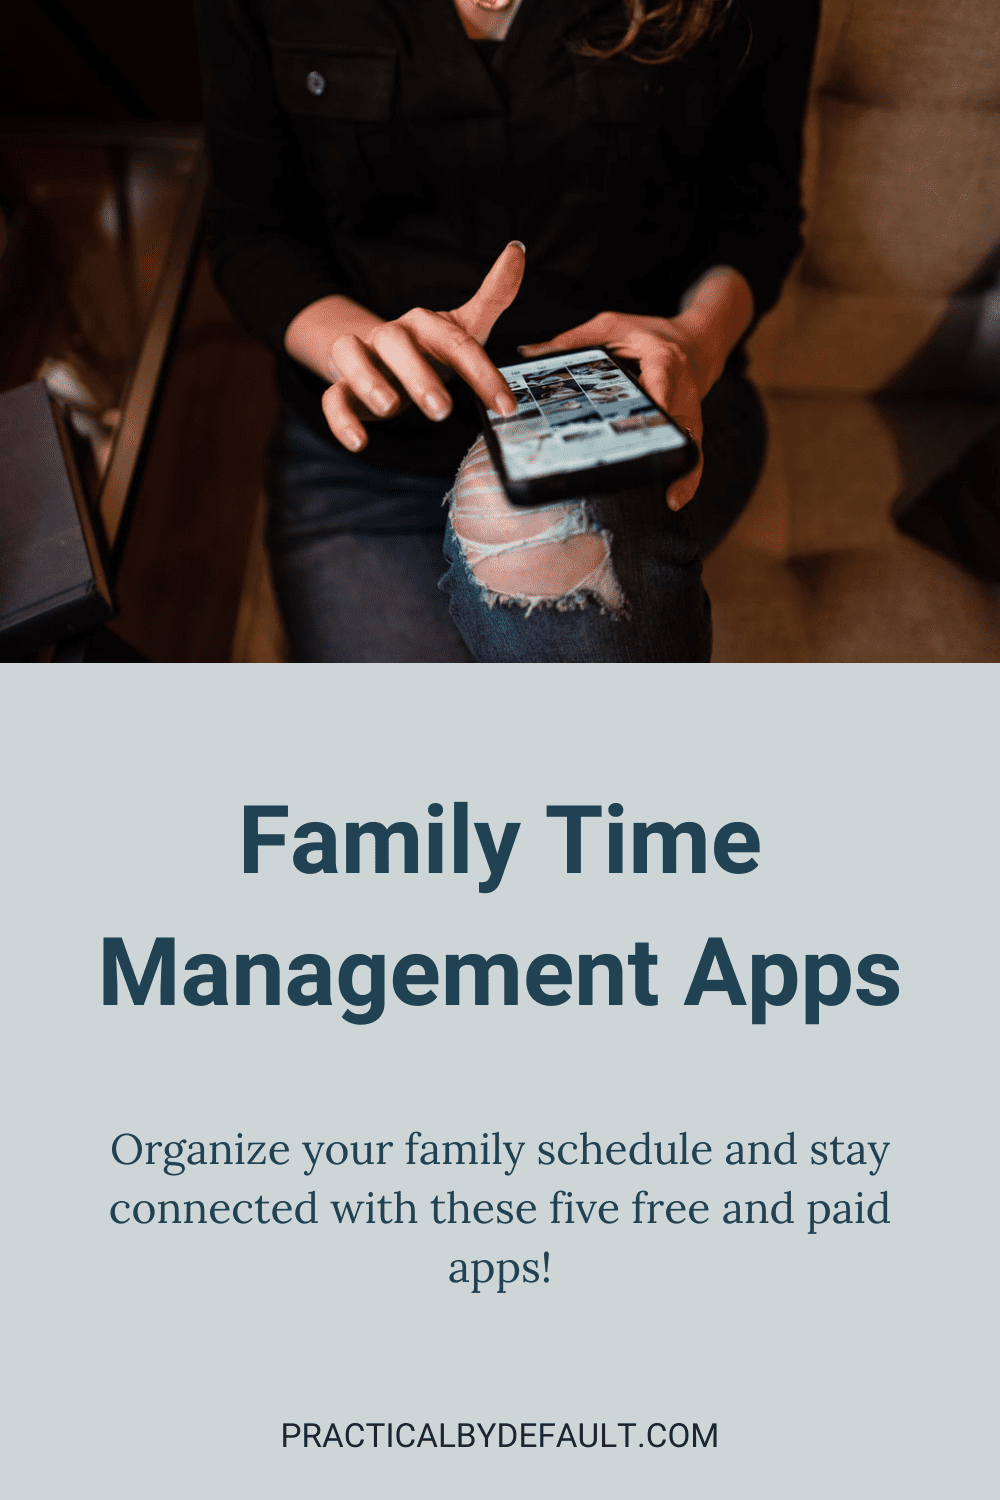 Family Time Management Apps